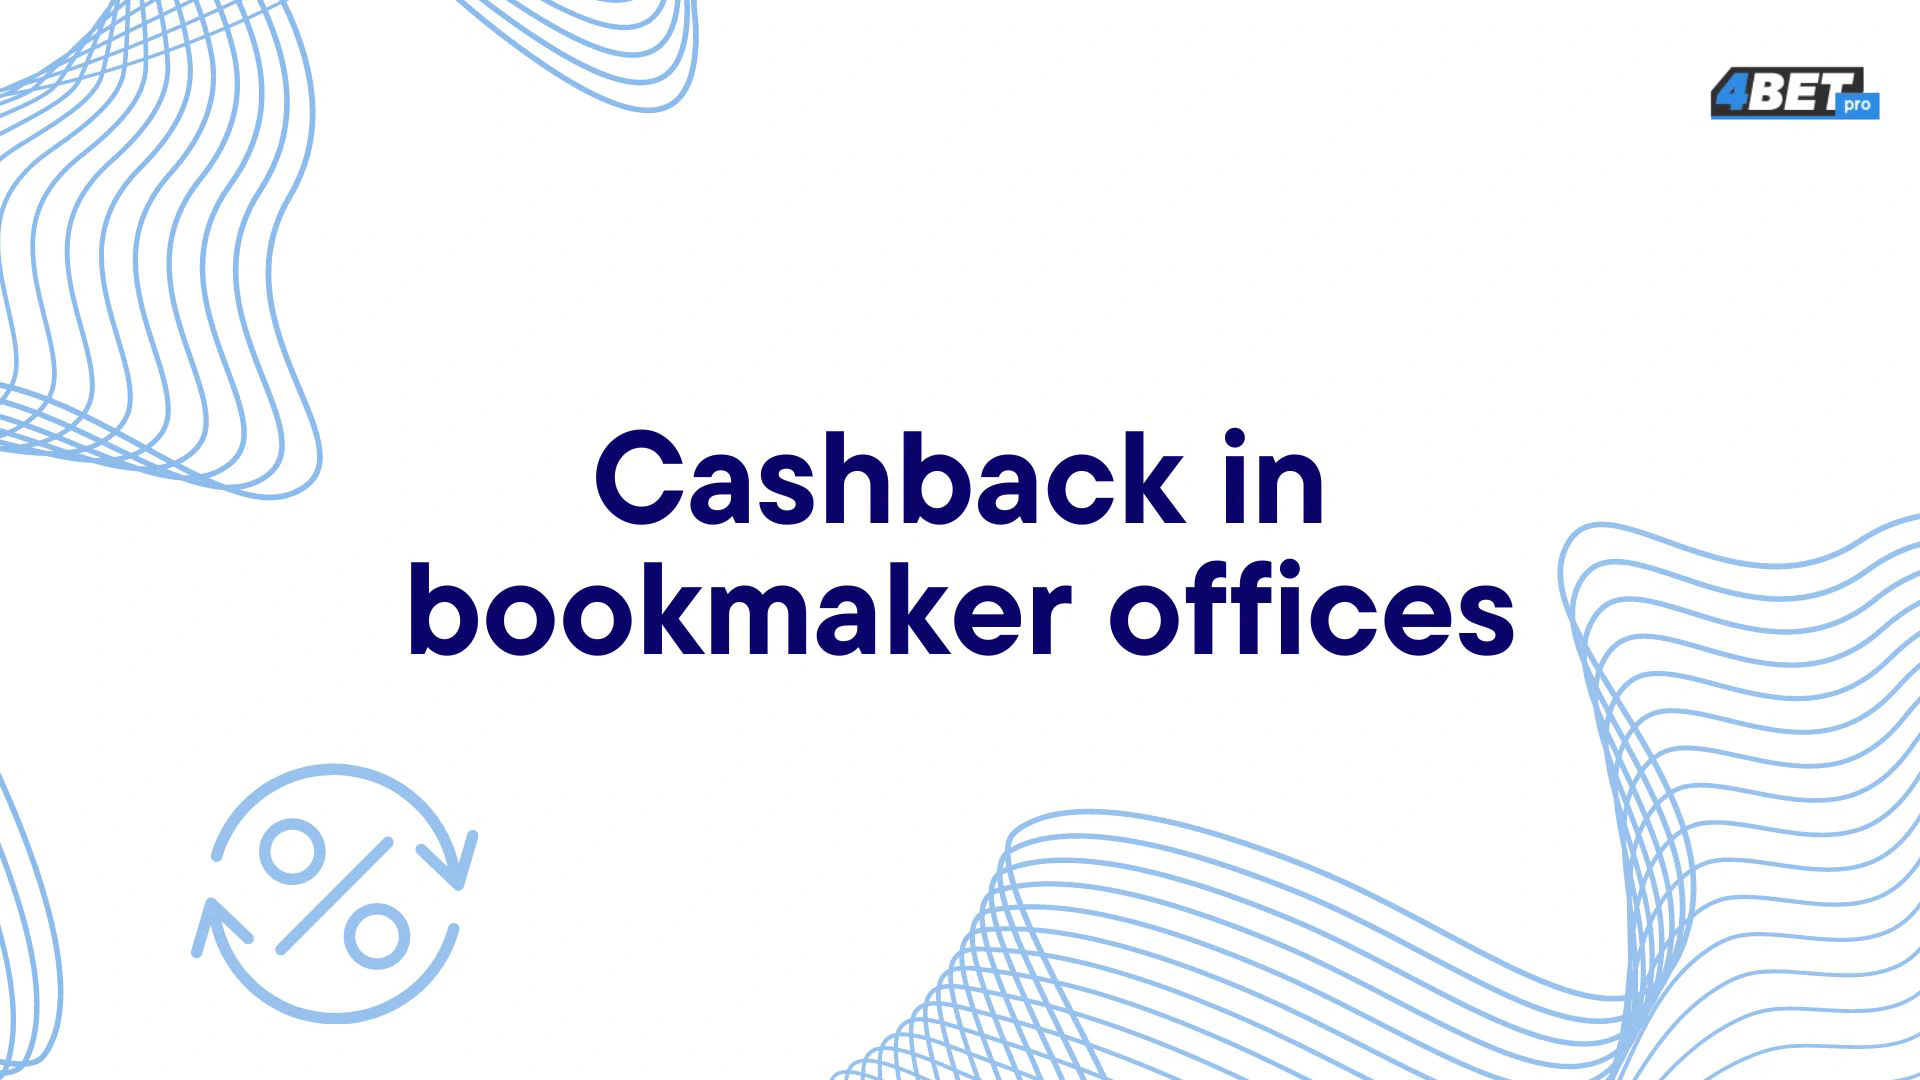 Where do they give cashback bookmaker